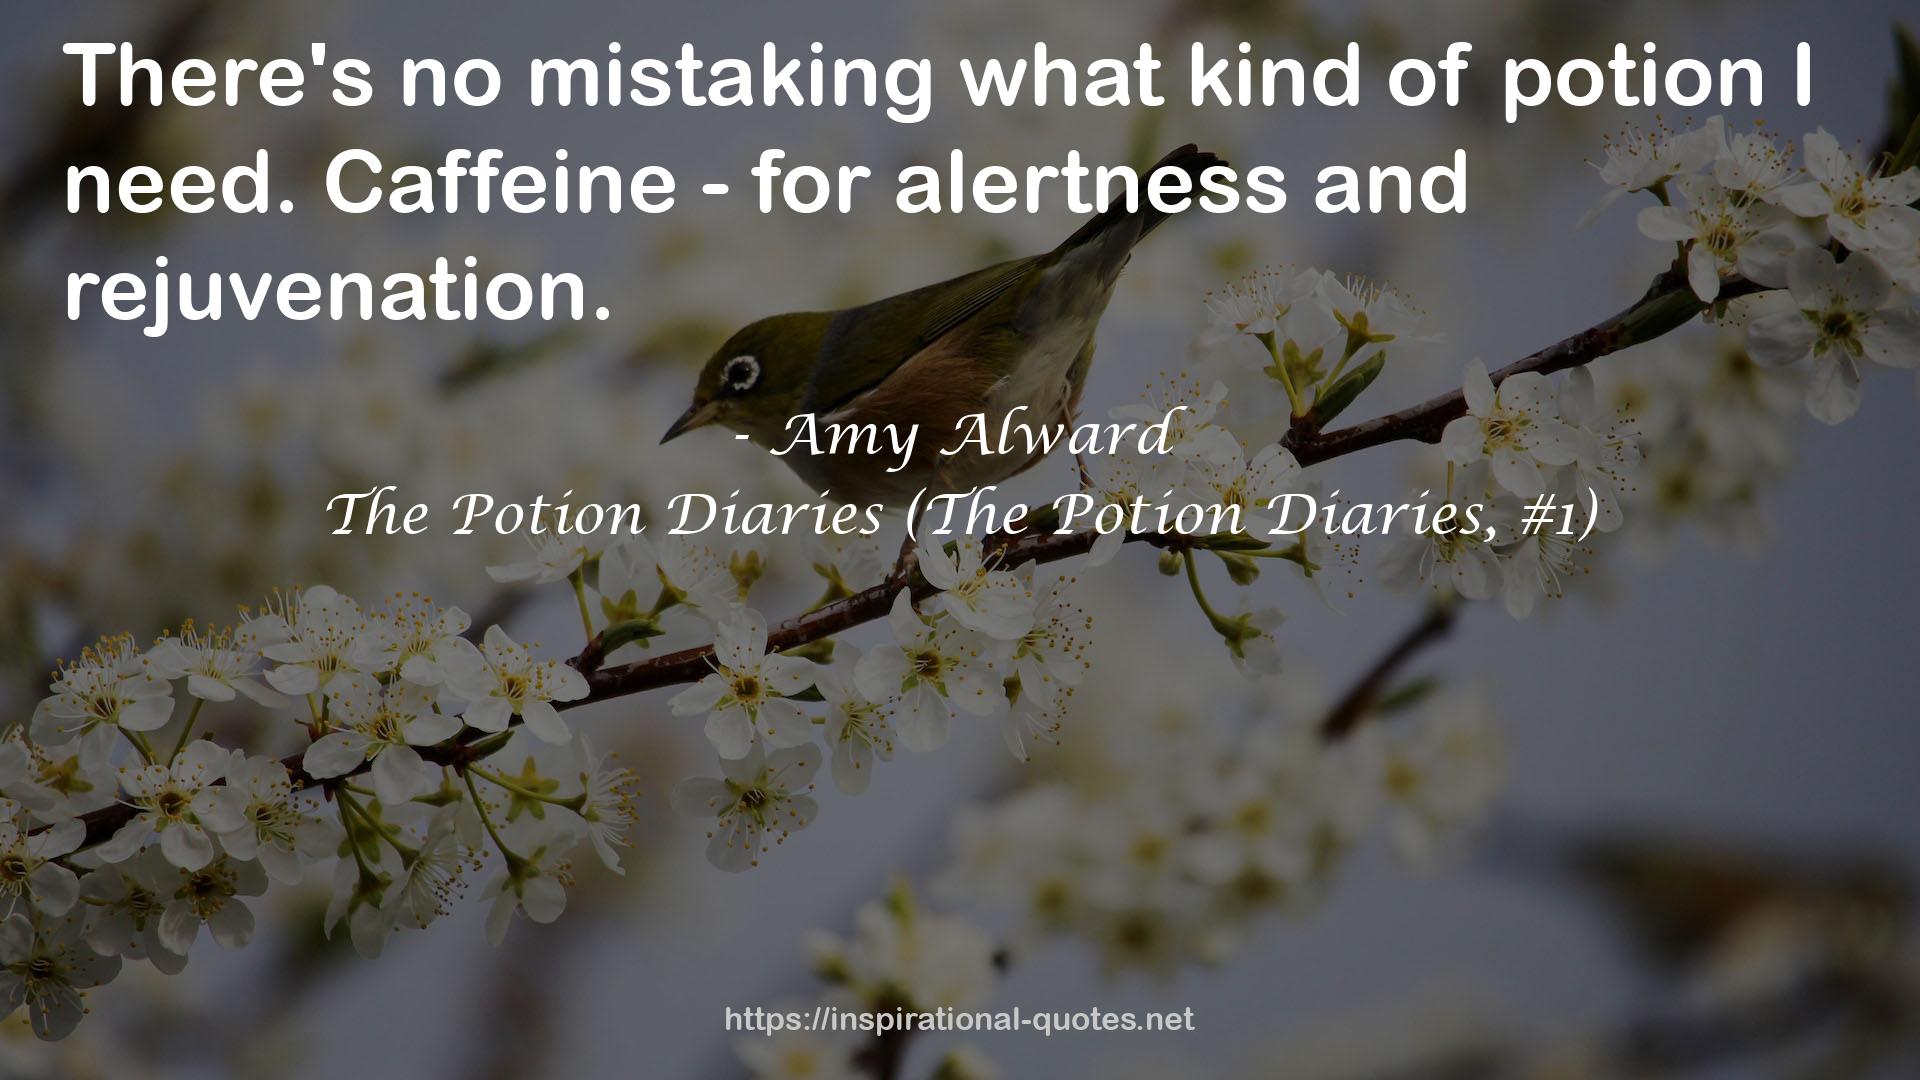 Amy Alward QUOTES